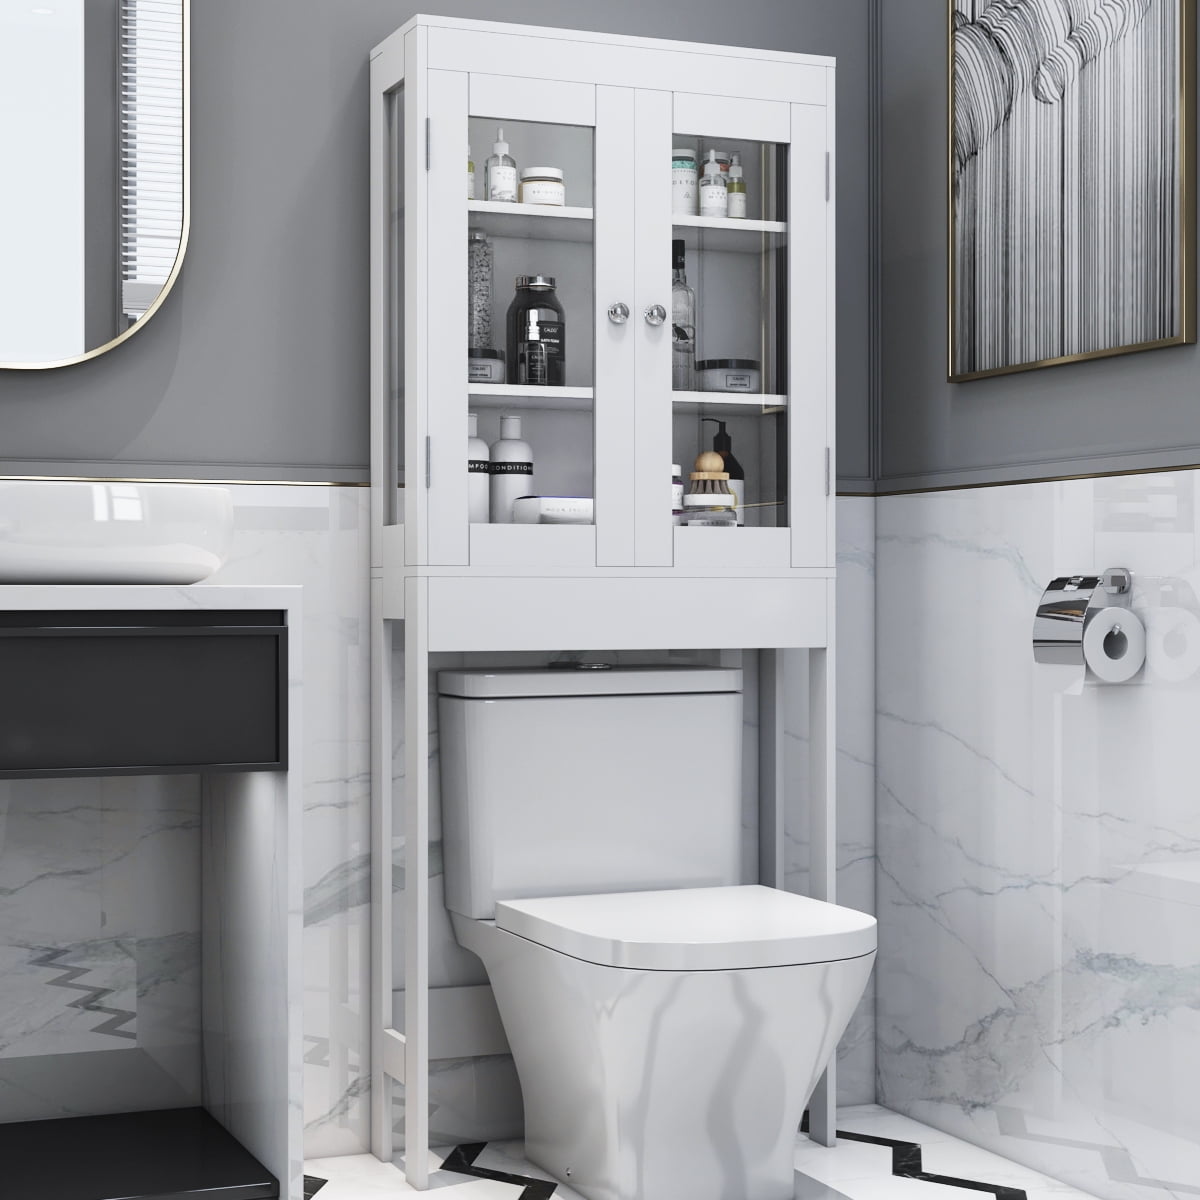 Details about   Over The Toilet Bathroom Storage Spacesaver With 2 Door Cabinet And Glass Window 